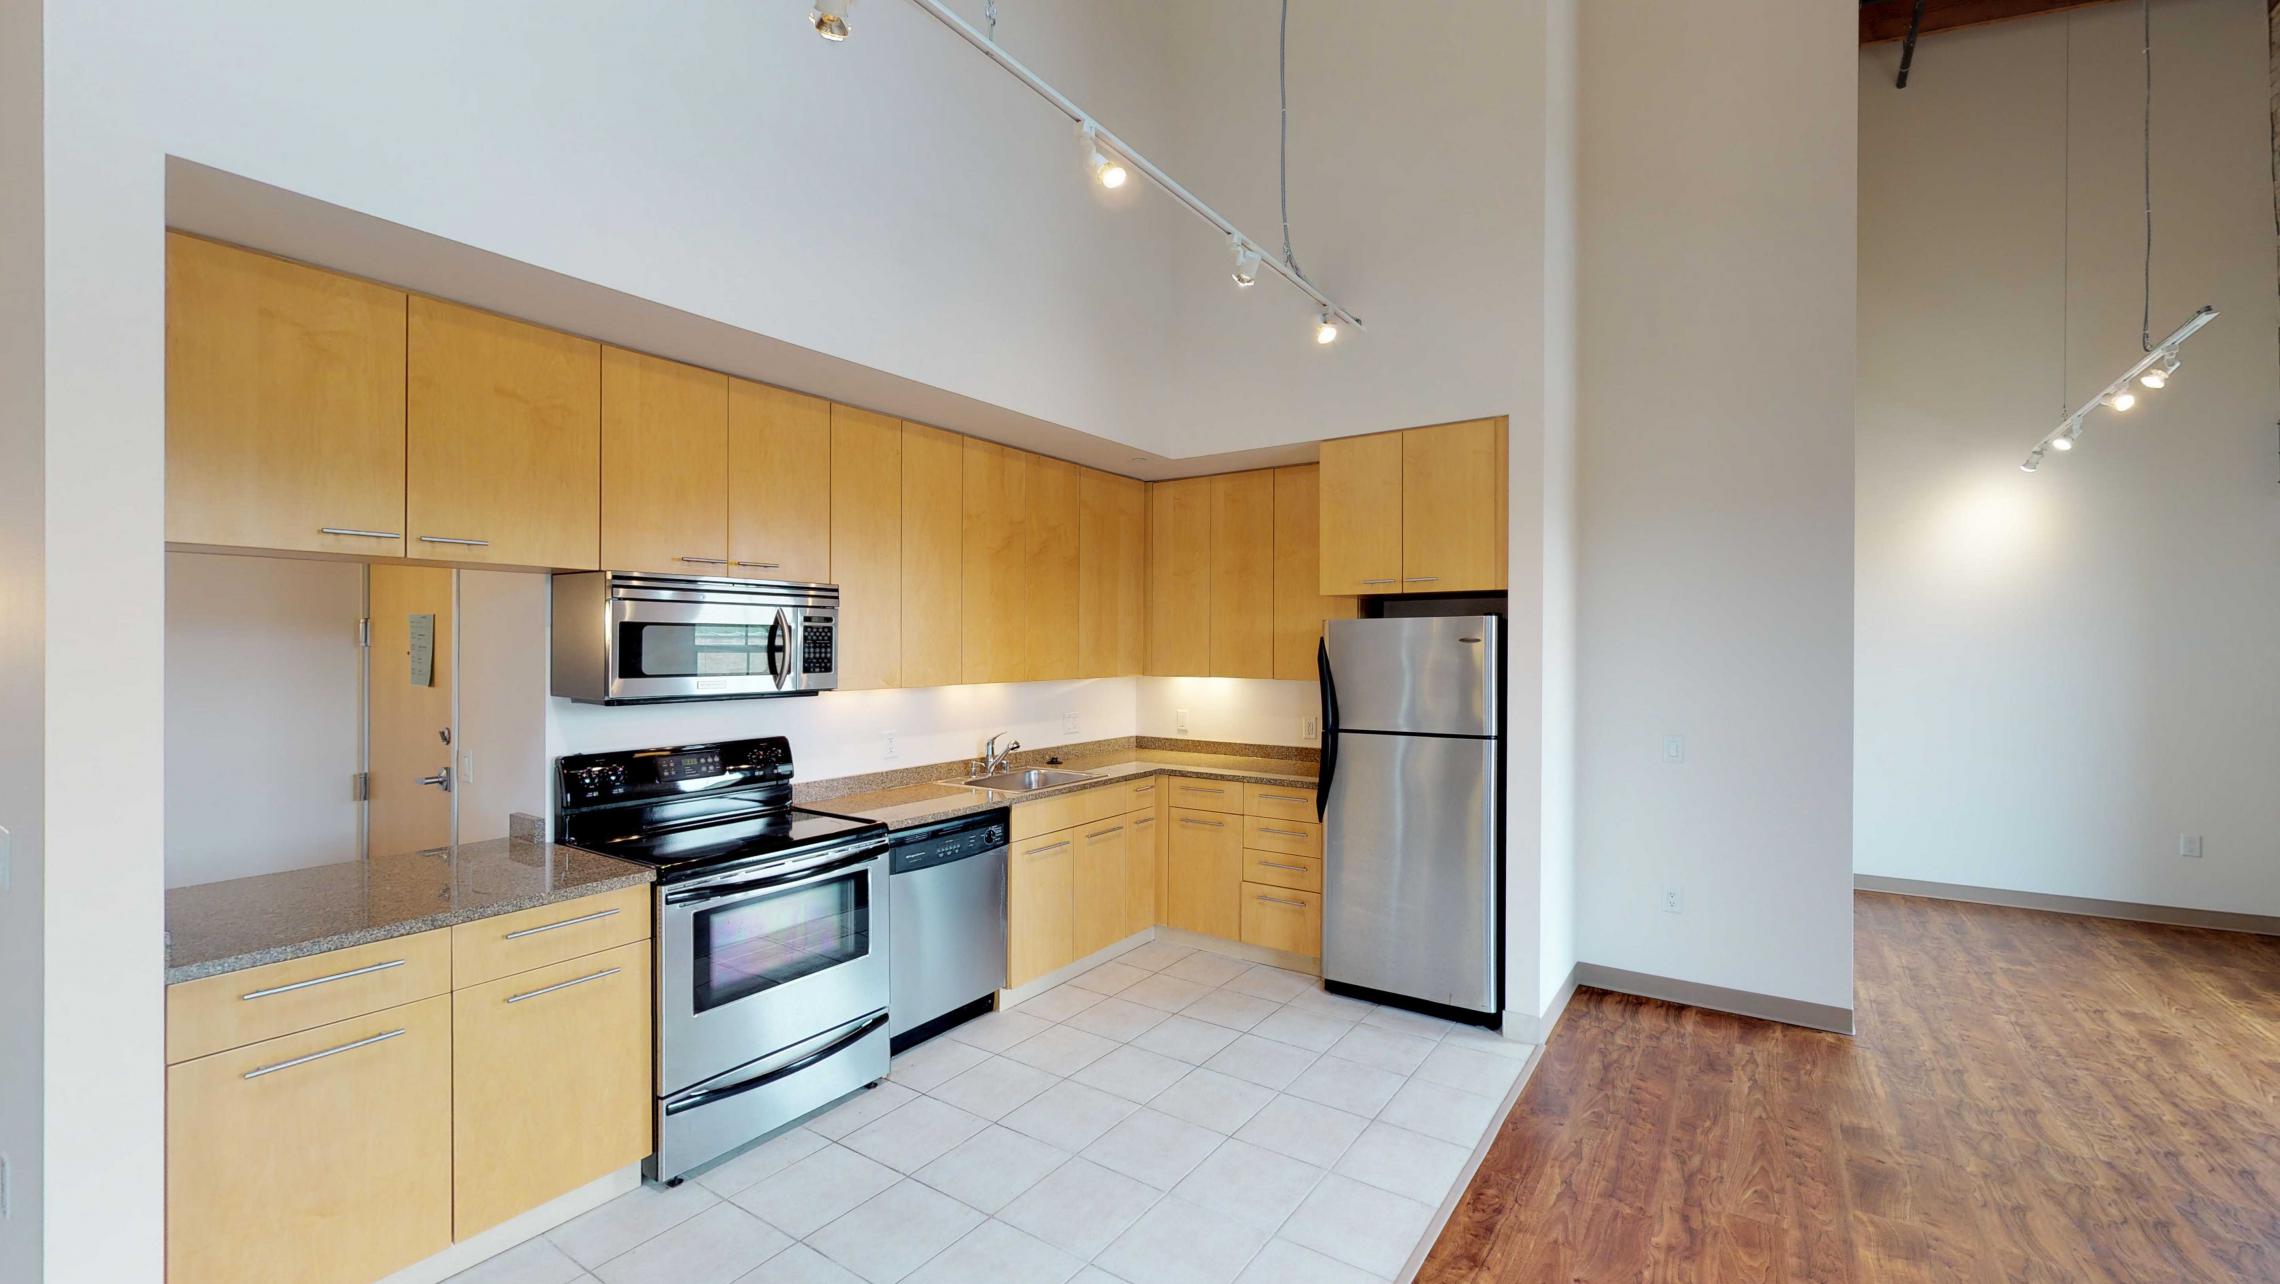 Tobacco-Lofts-Apartment-E306-Kitchen-Lofted-Two-Bedroom-Madison-Historic-Yards-Downtown-Exposed-brick.jpg